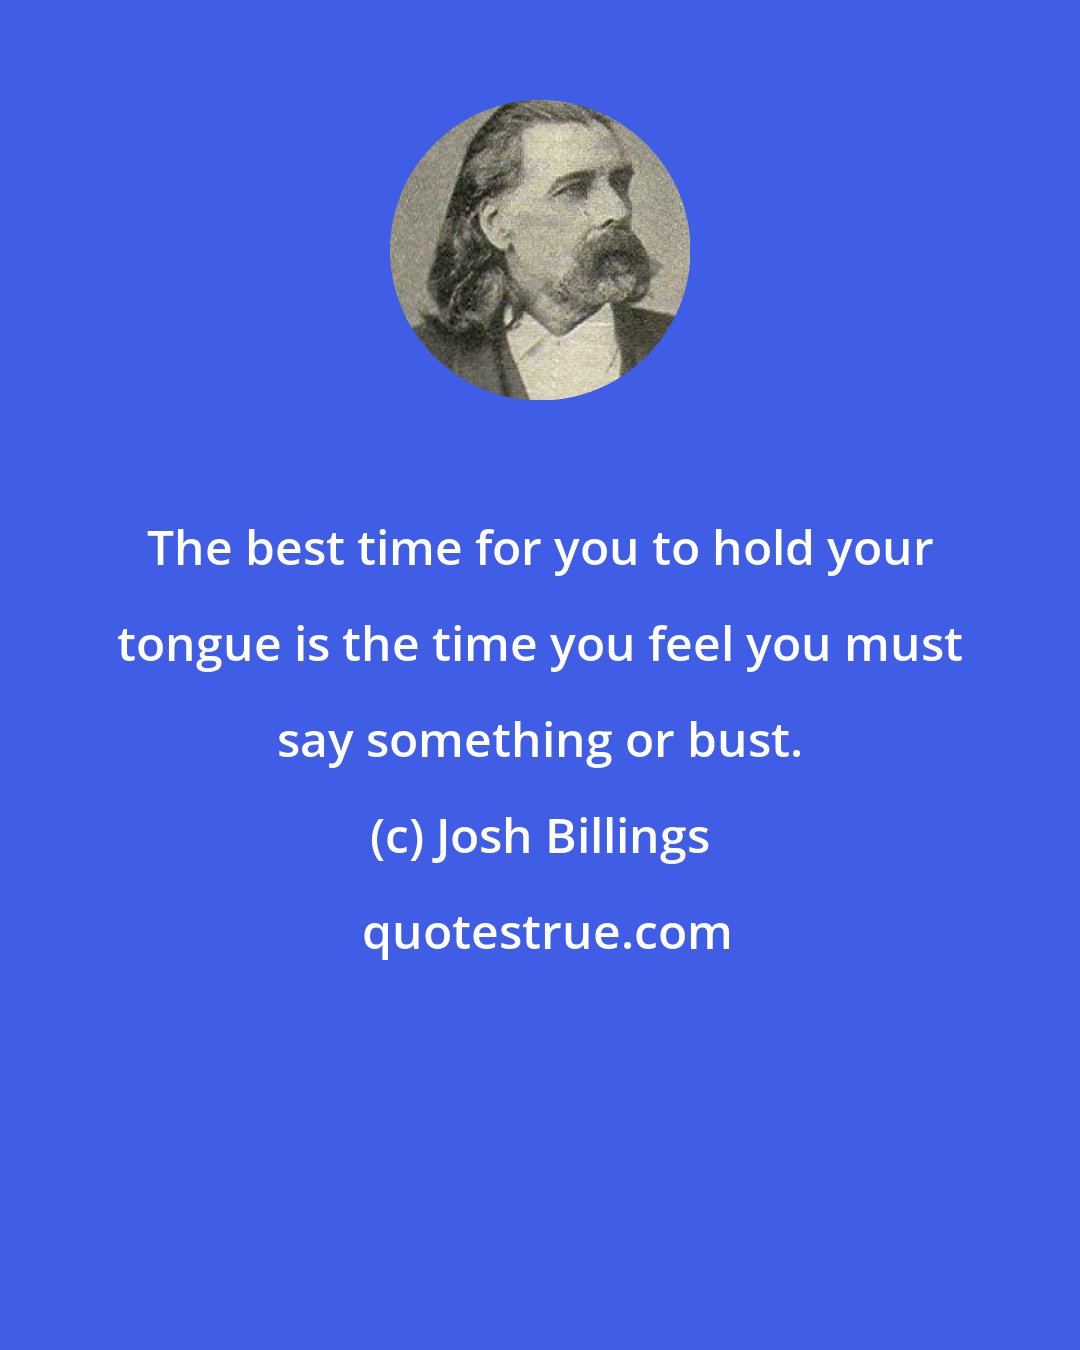 Josh Billings: The best time for you to hold your tongue is the time you feel you must say something or bust.